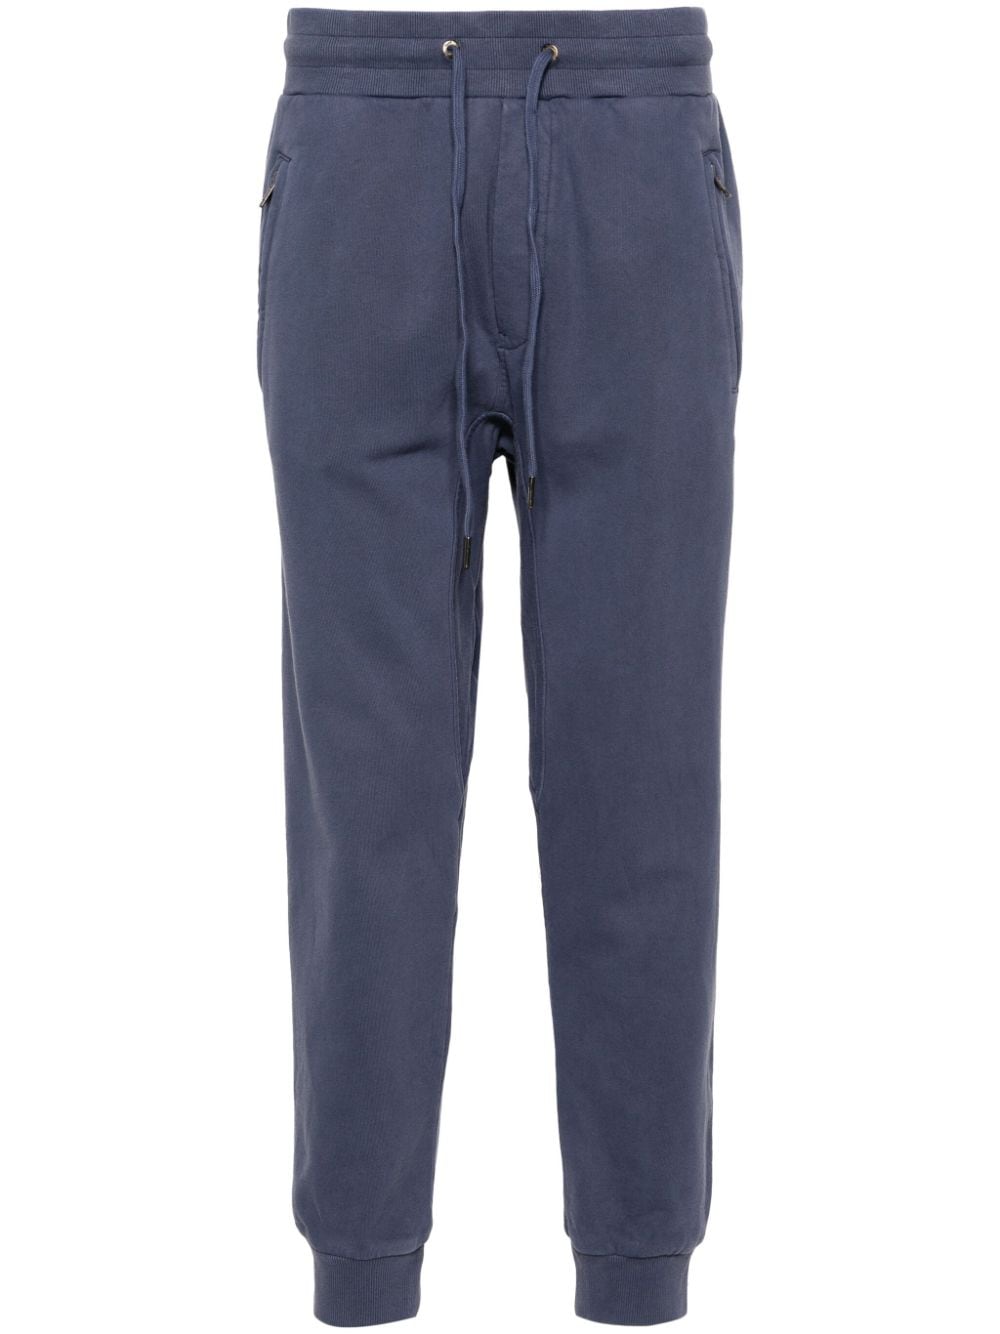 4x4 mid-rise track trousers